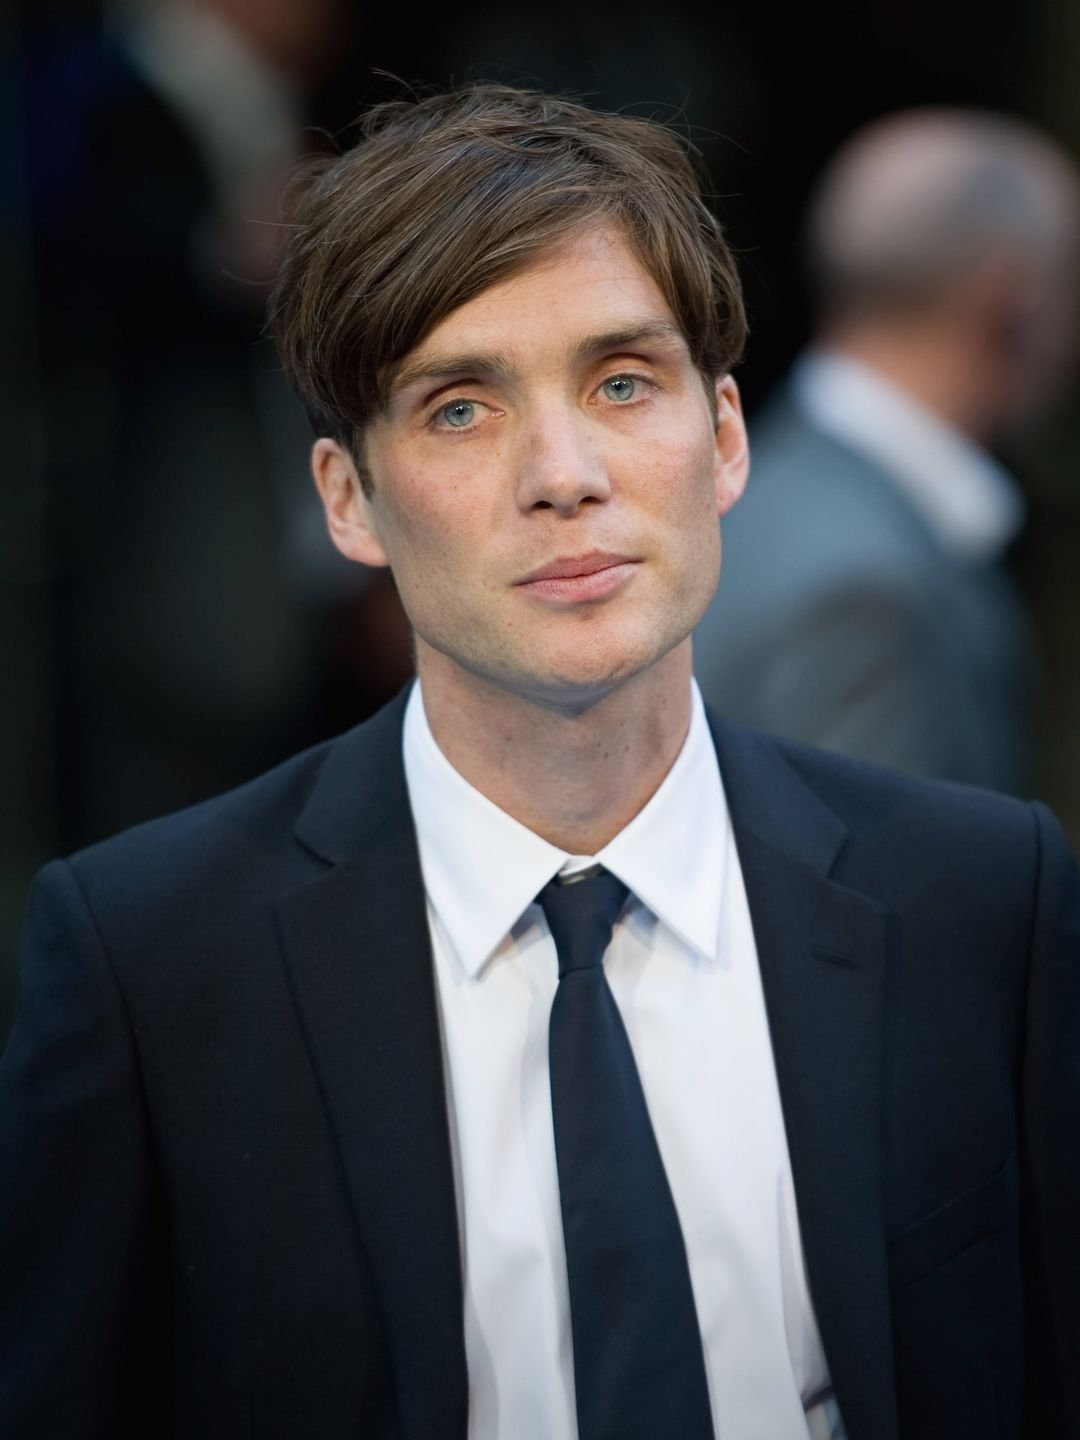 Cillian Murphy who is his father